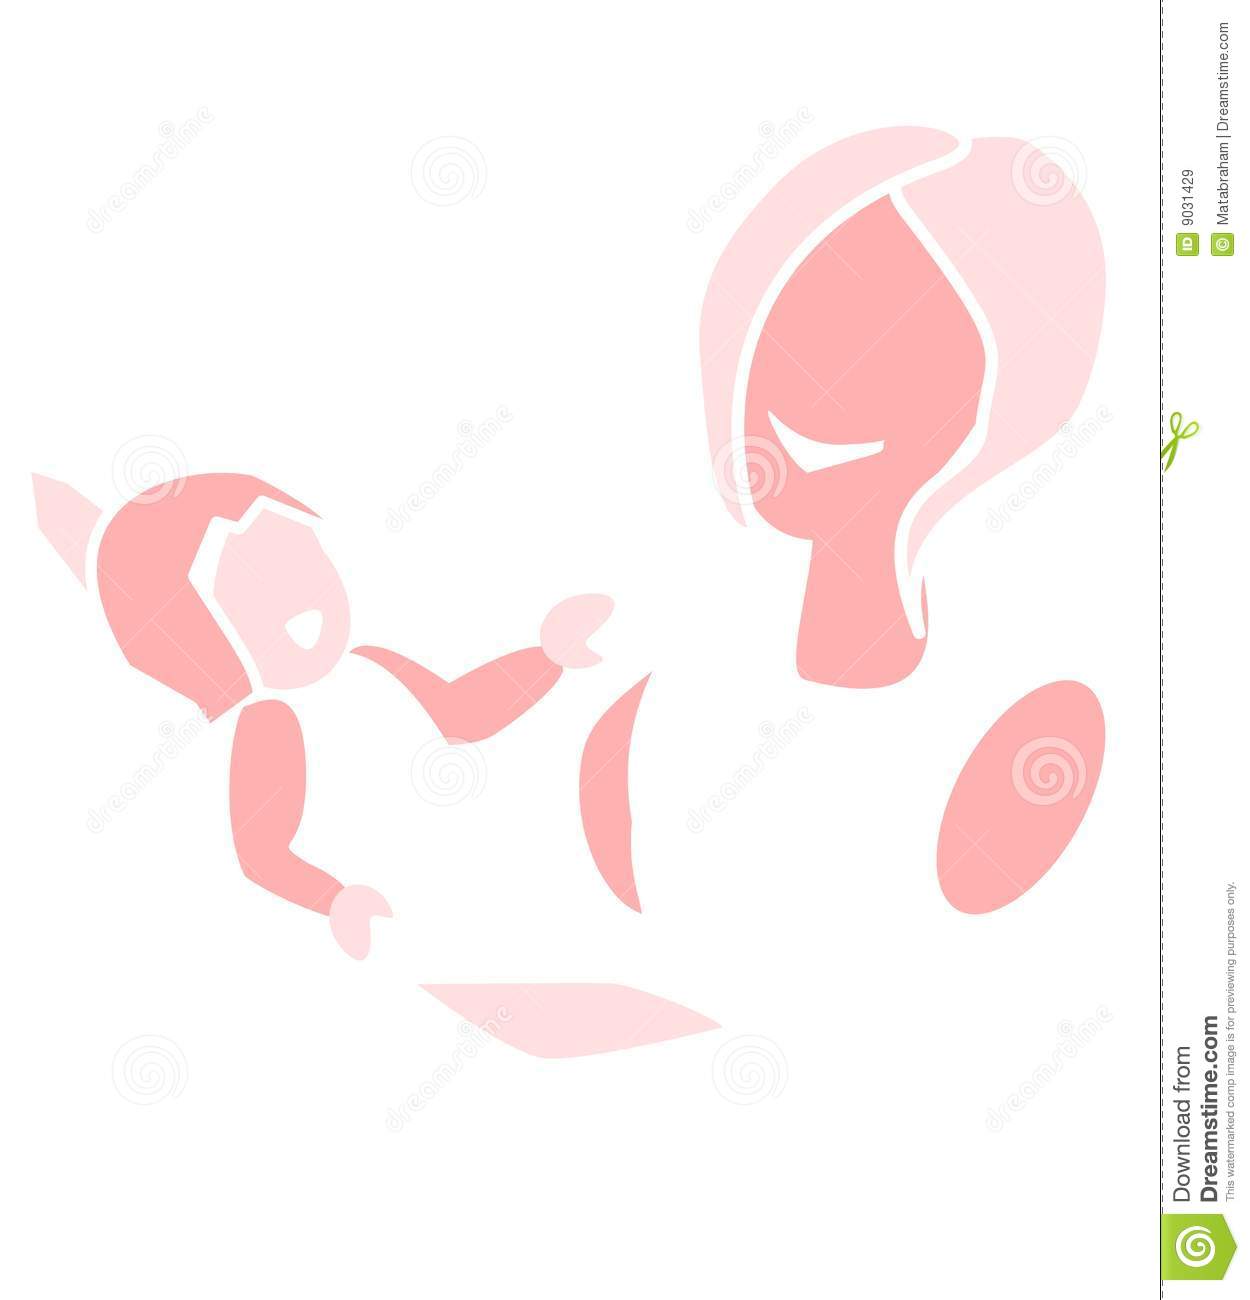 Mother S Day Illustration Mother And Child Royalty Free Stock Images